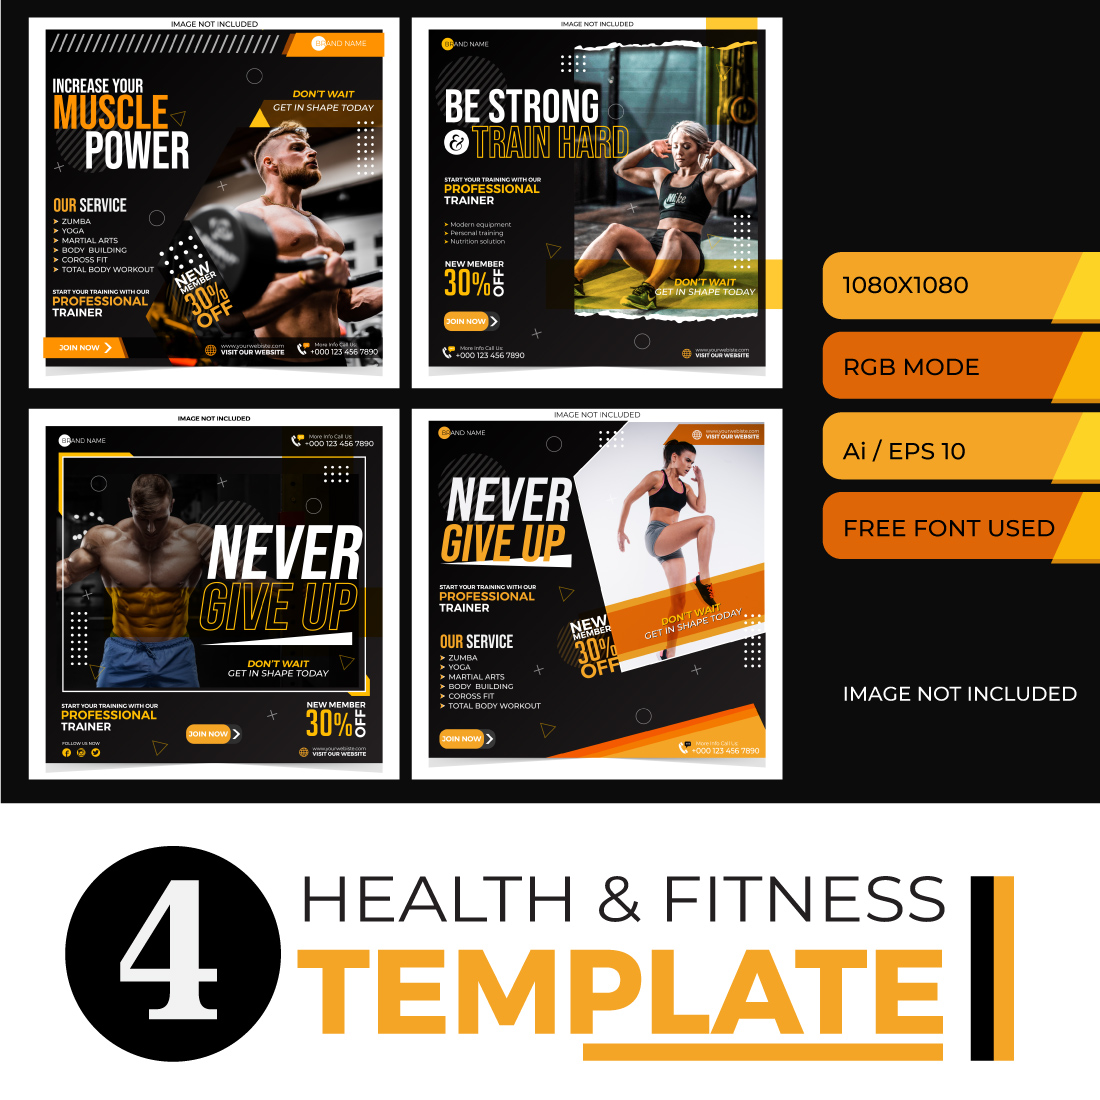 Health & Fitness social media template cover image.